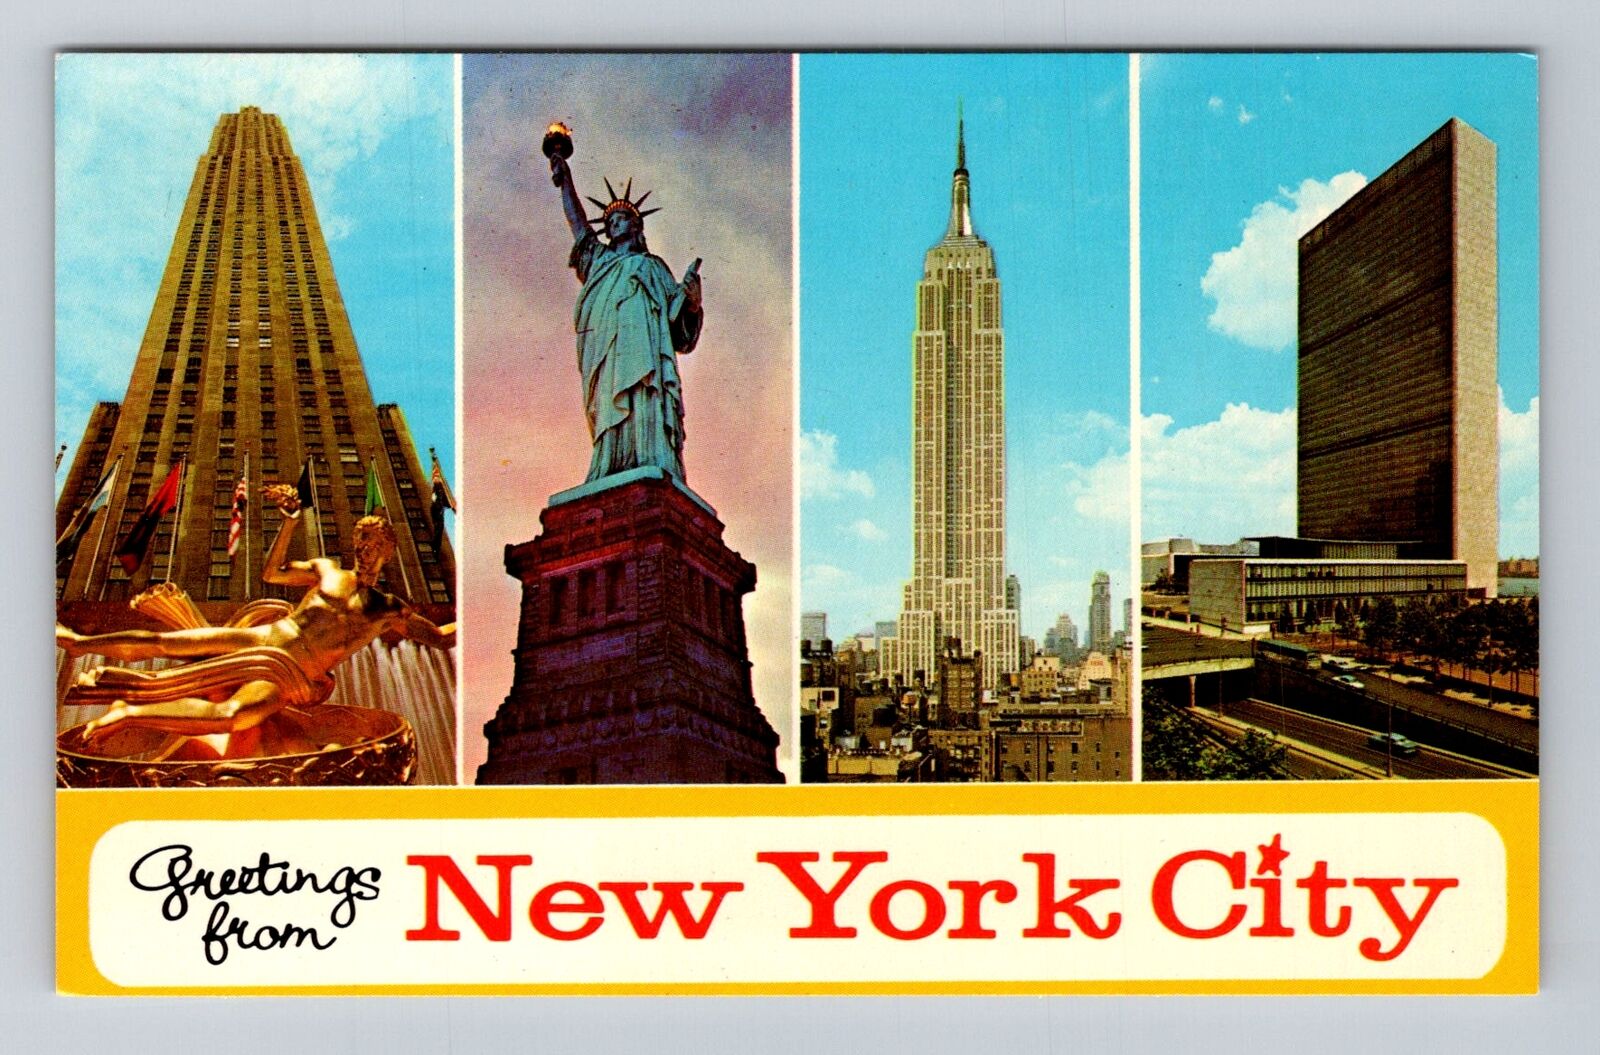 New York City NY, General Banner Greetings, Points of Interests Vintage Postcard